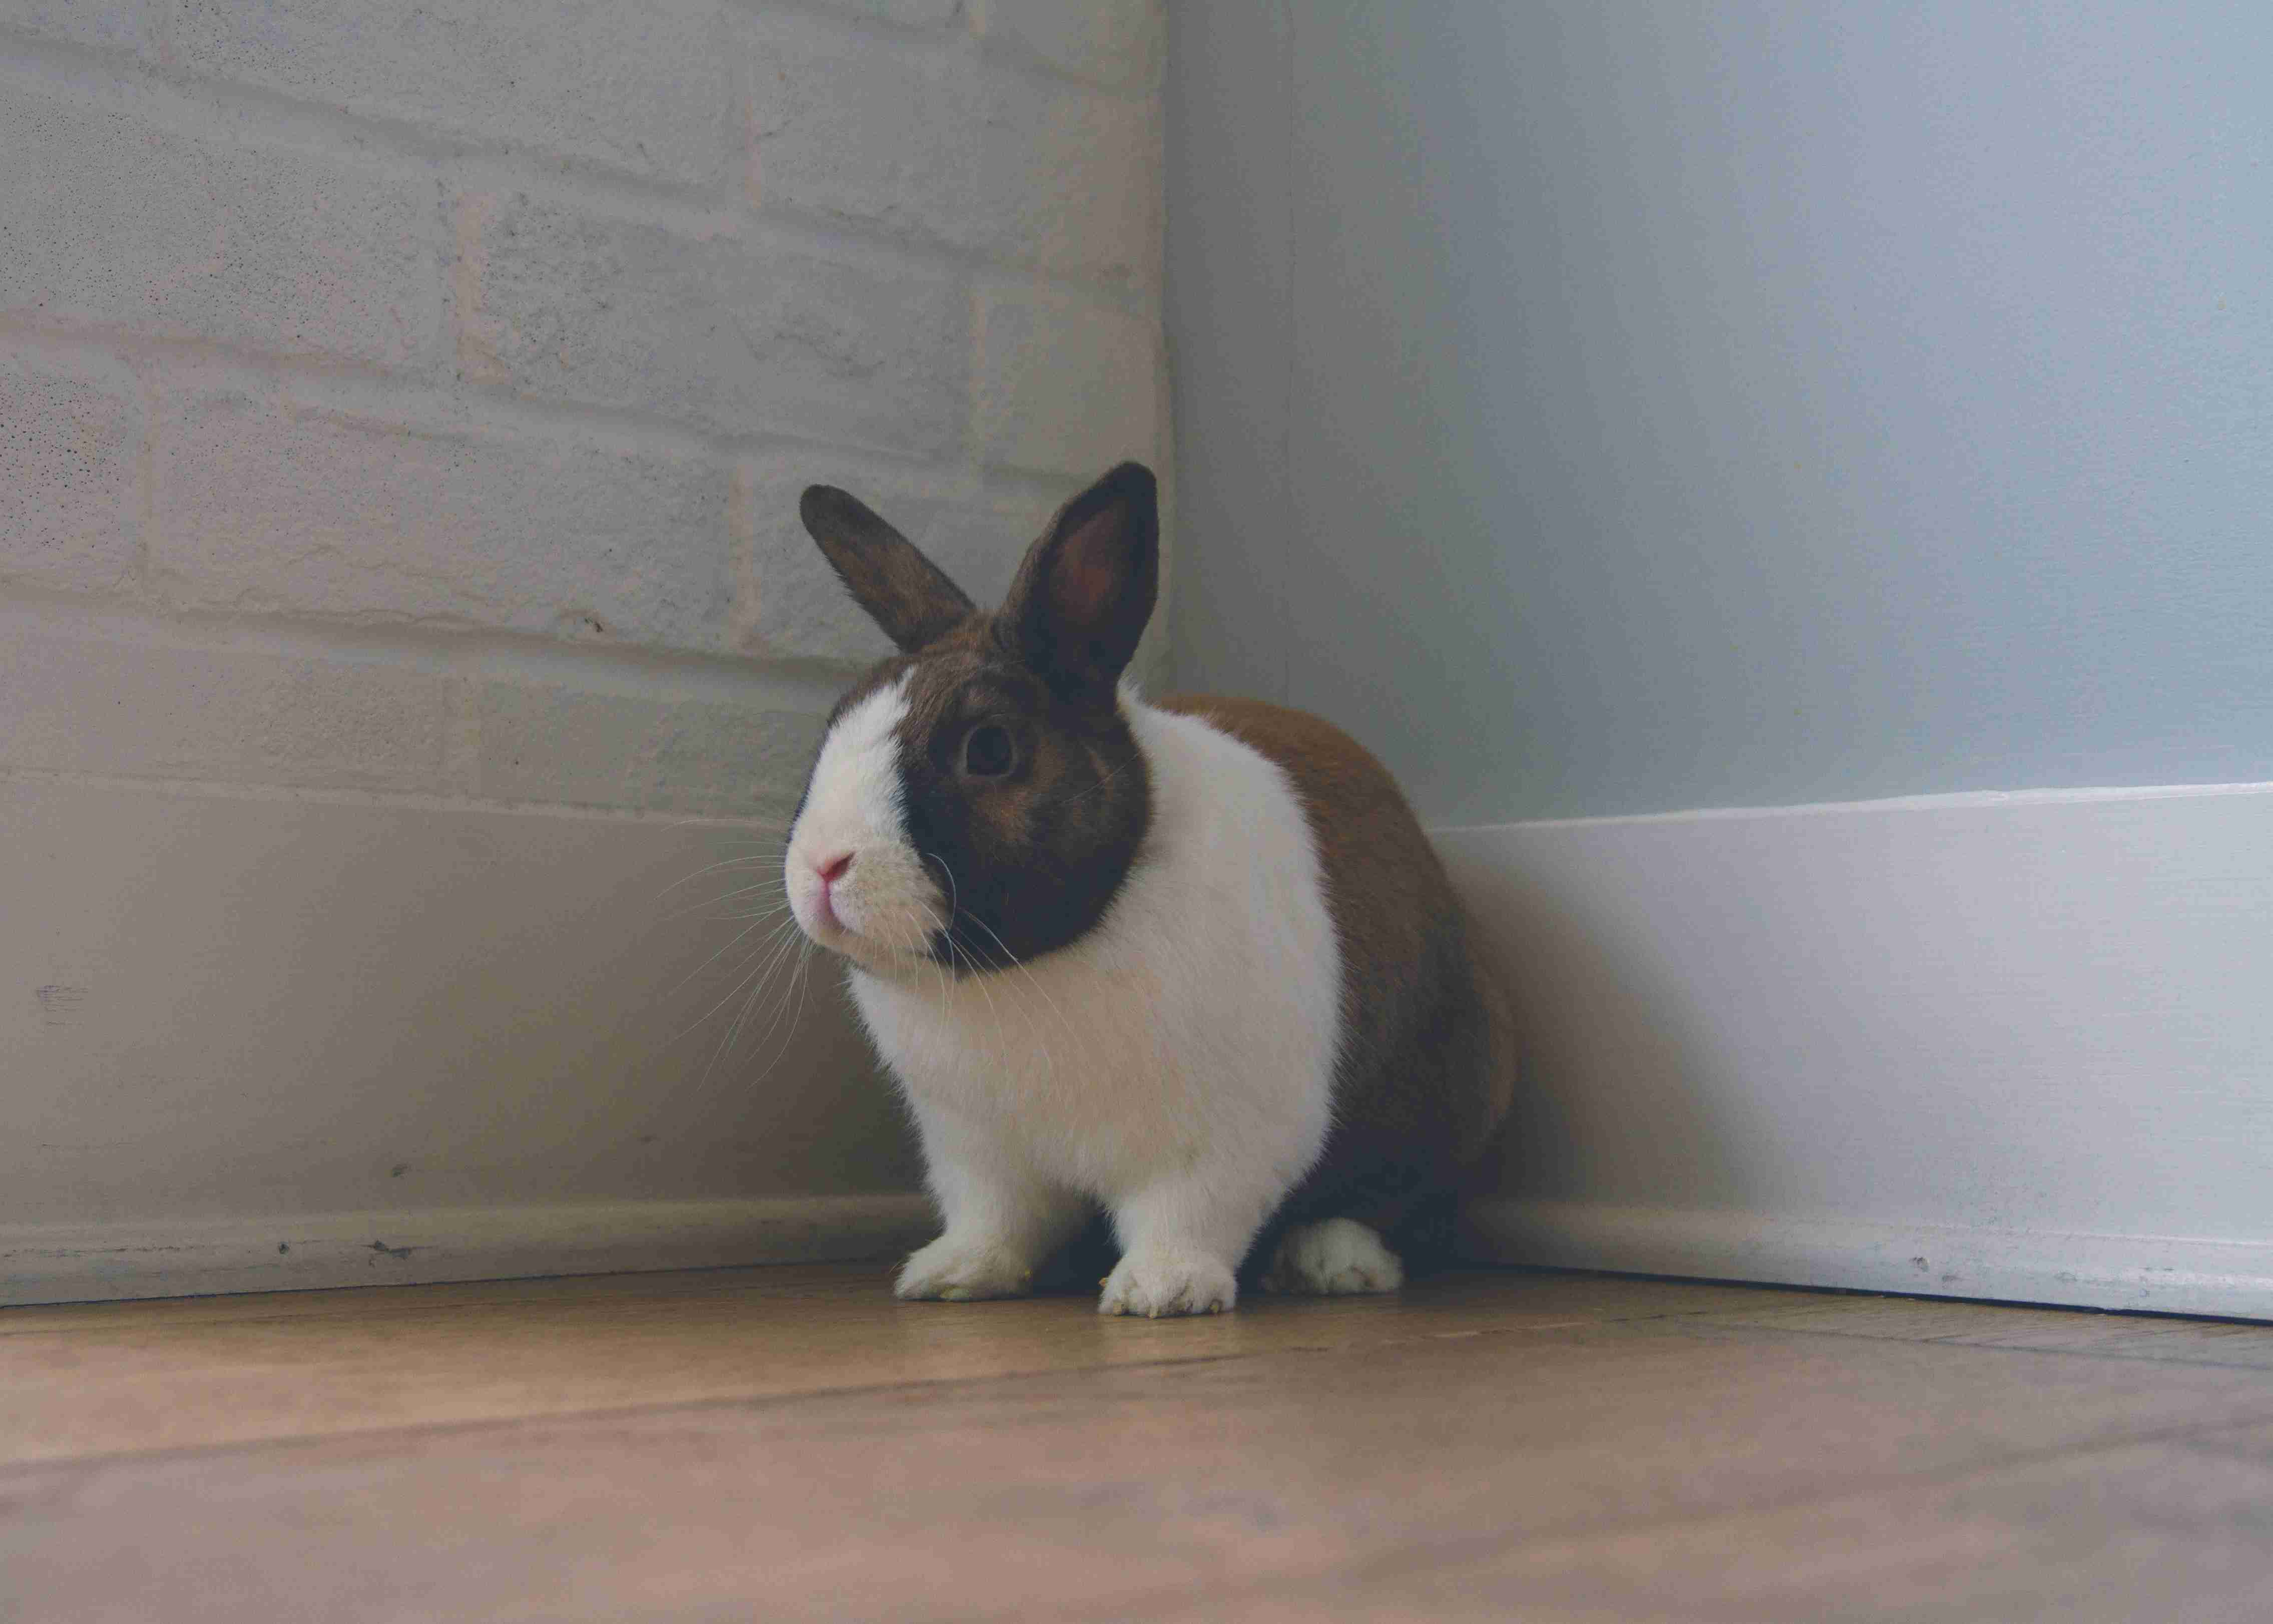 10 Fun and Safe Household Items for Rabbits to Play With